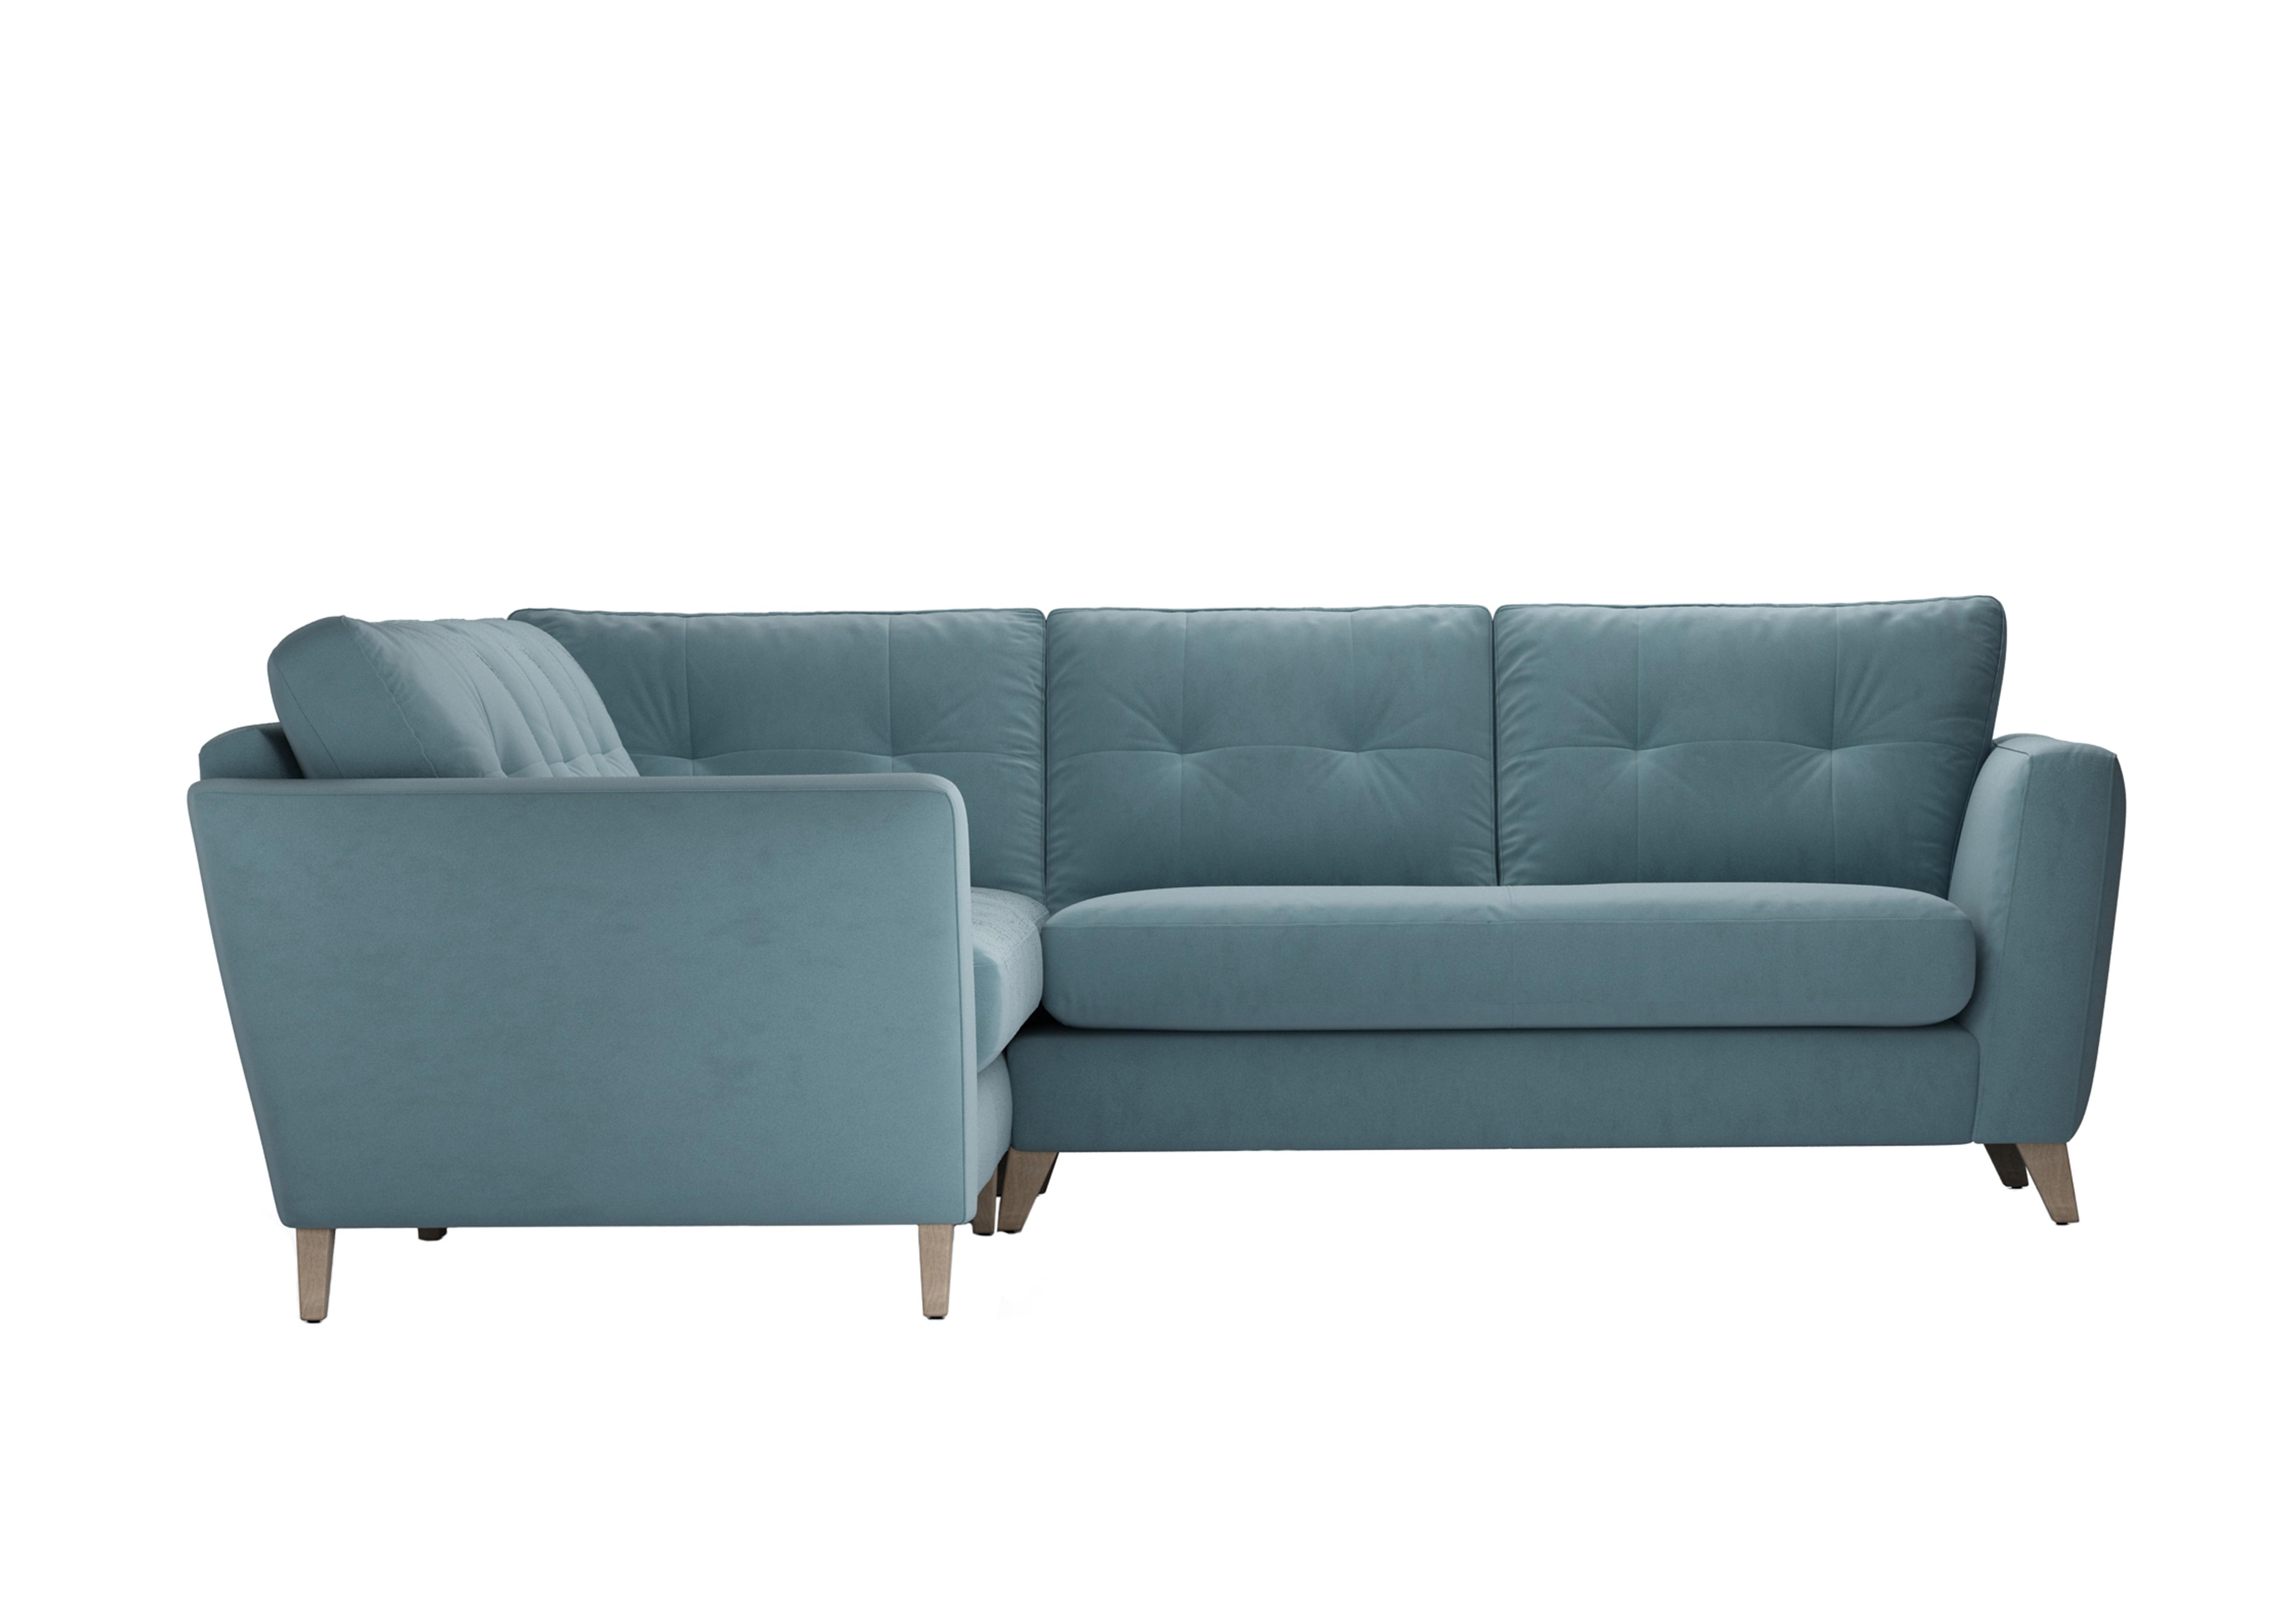 Hermione Fabric Corner Sofa in Sha252 Shallow Puddle Wo Ft on Furniture Village